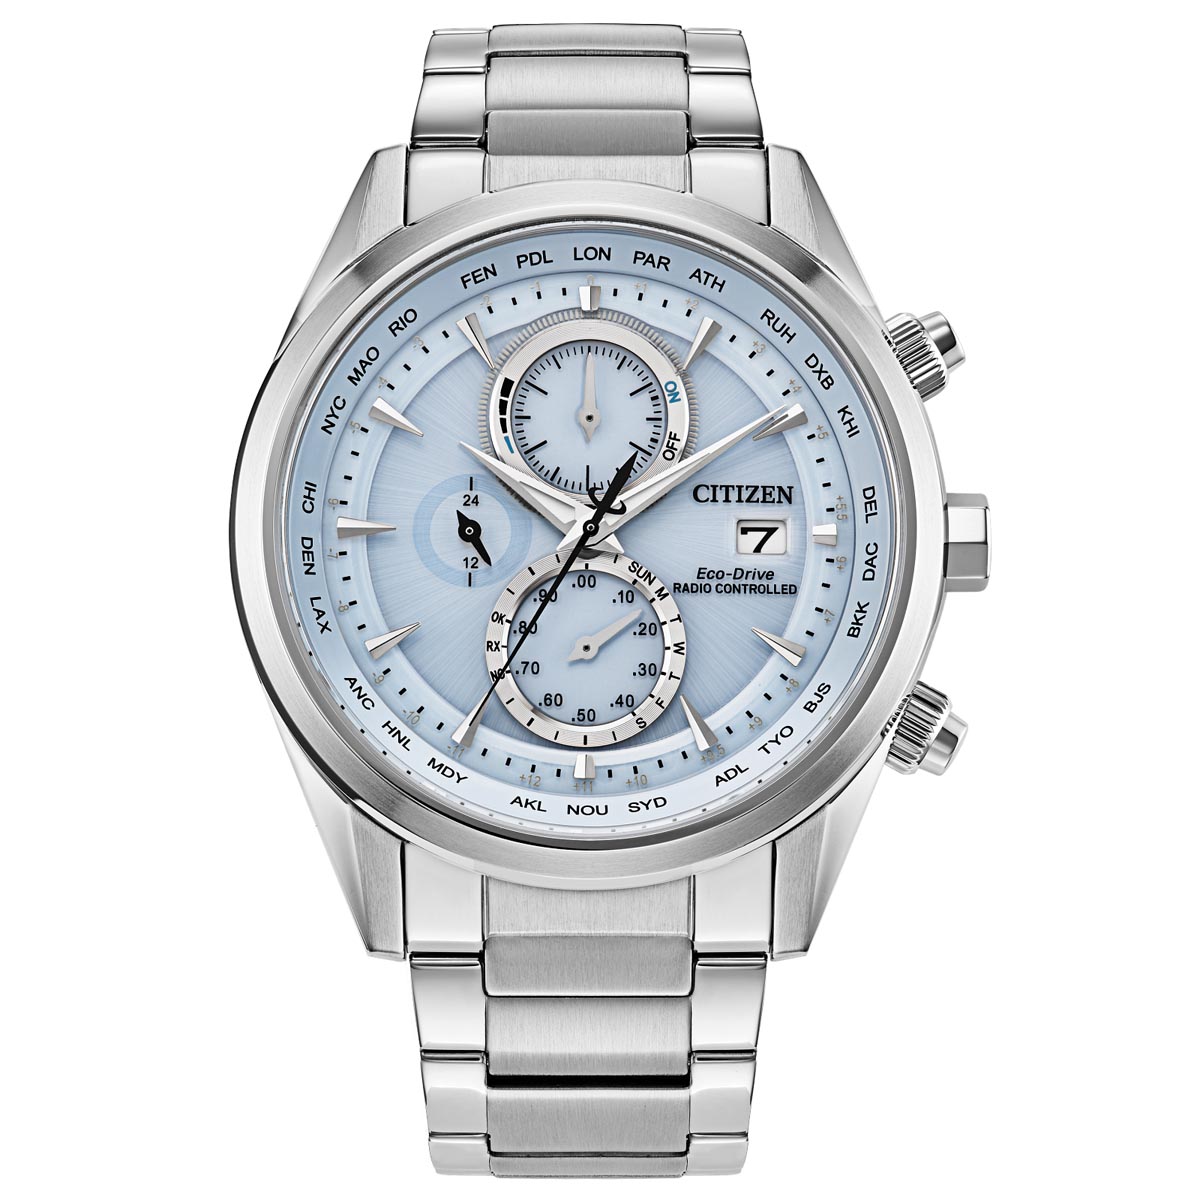 Citizen Sport Luxury Mens Watch with Light Blue Dial and Stainless Steel Bracelet (eco drive movement)